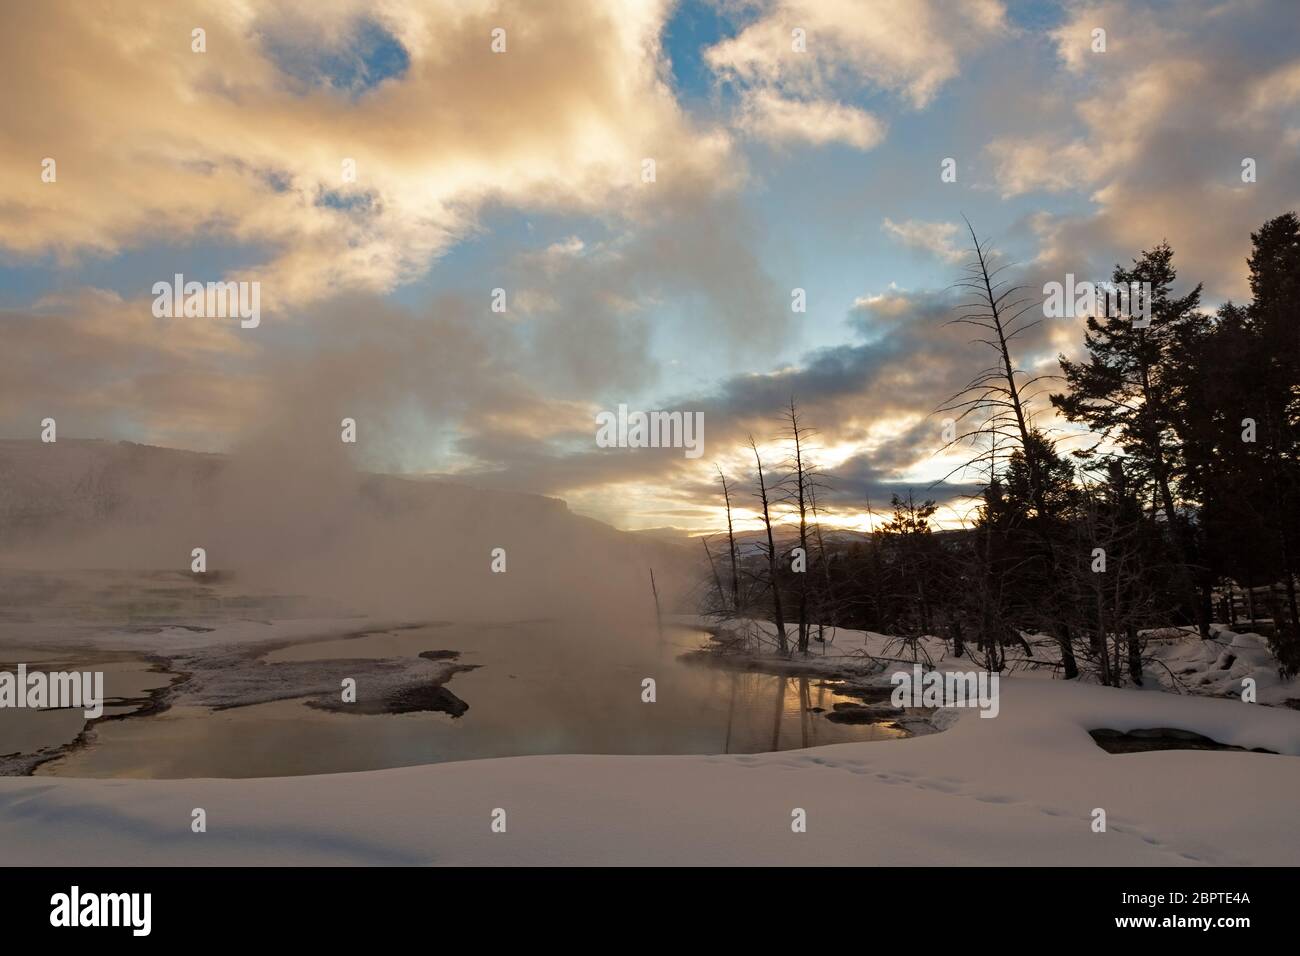 WY04470-00...WYOMING - Sunrise viewed from the hot spring pool at the top of Canary Spring at Mammoth Hot Springs in Yellowstone National Park. Stock Photo